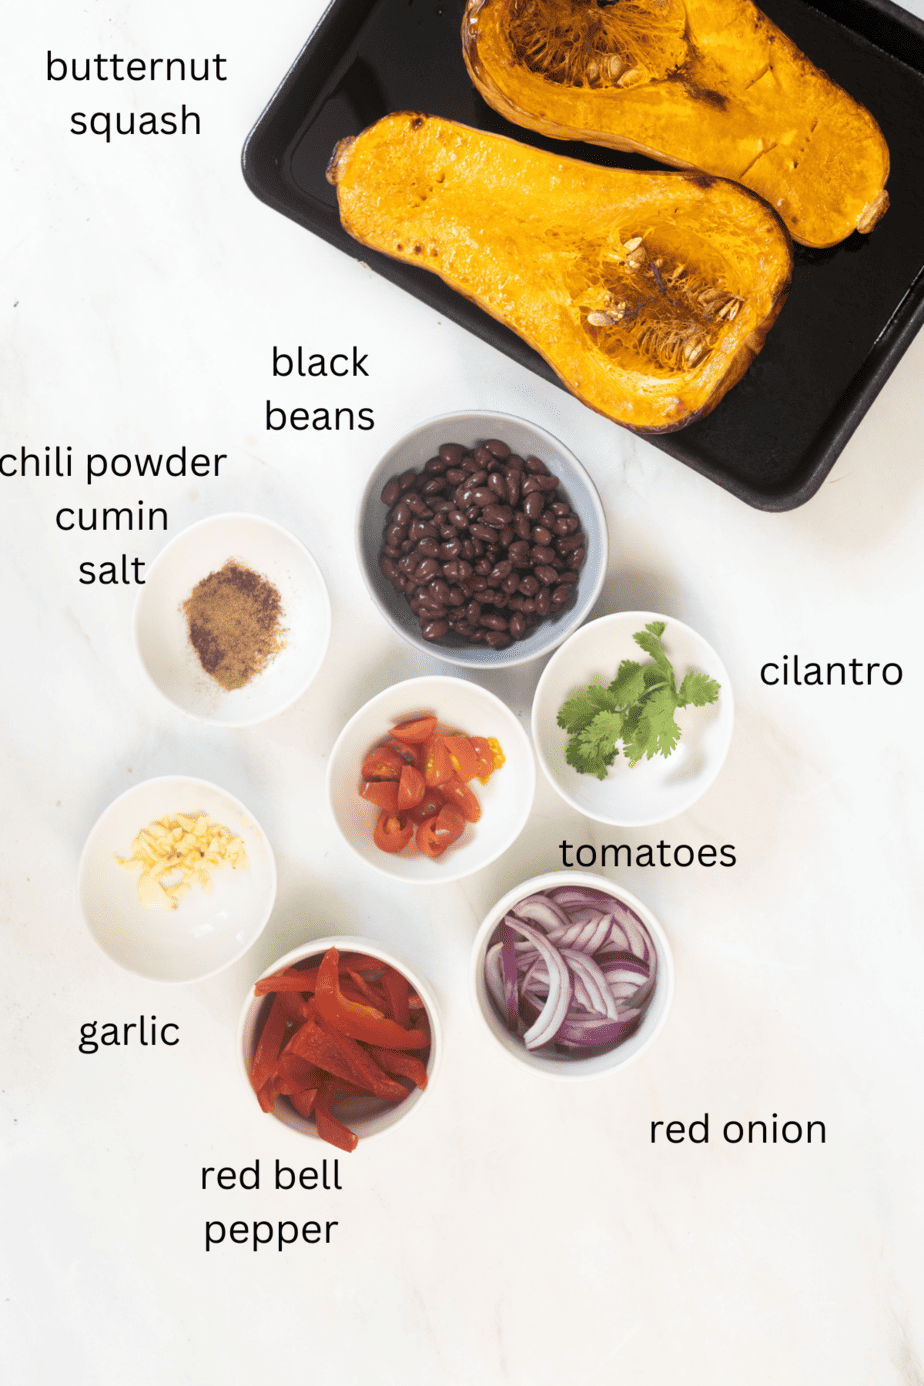 ingredients for butternut squash black bean tacos all labeled